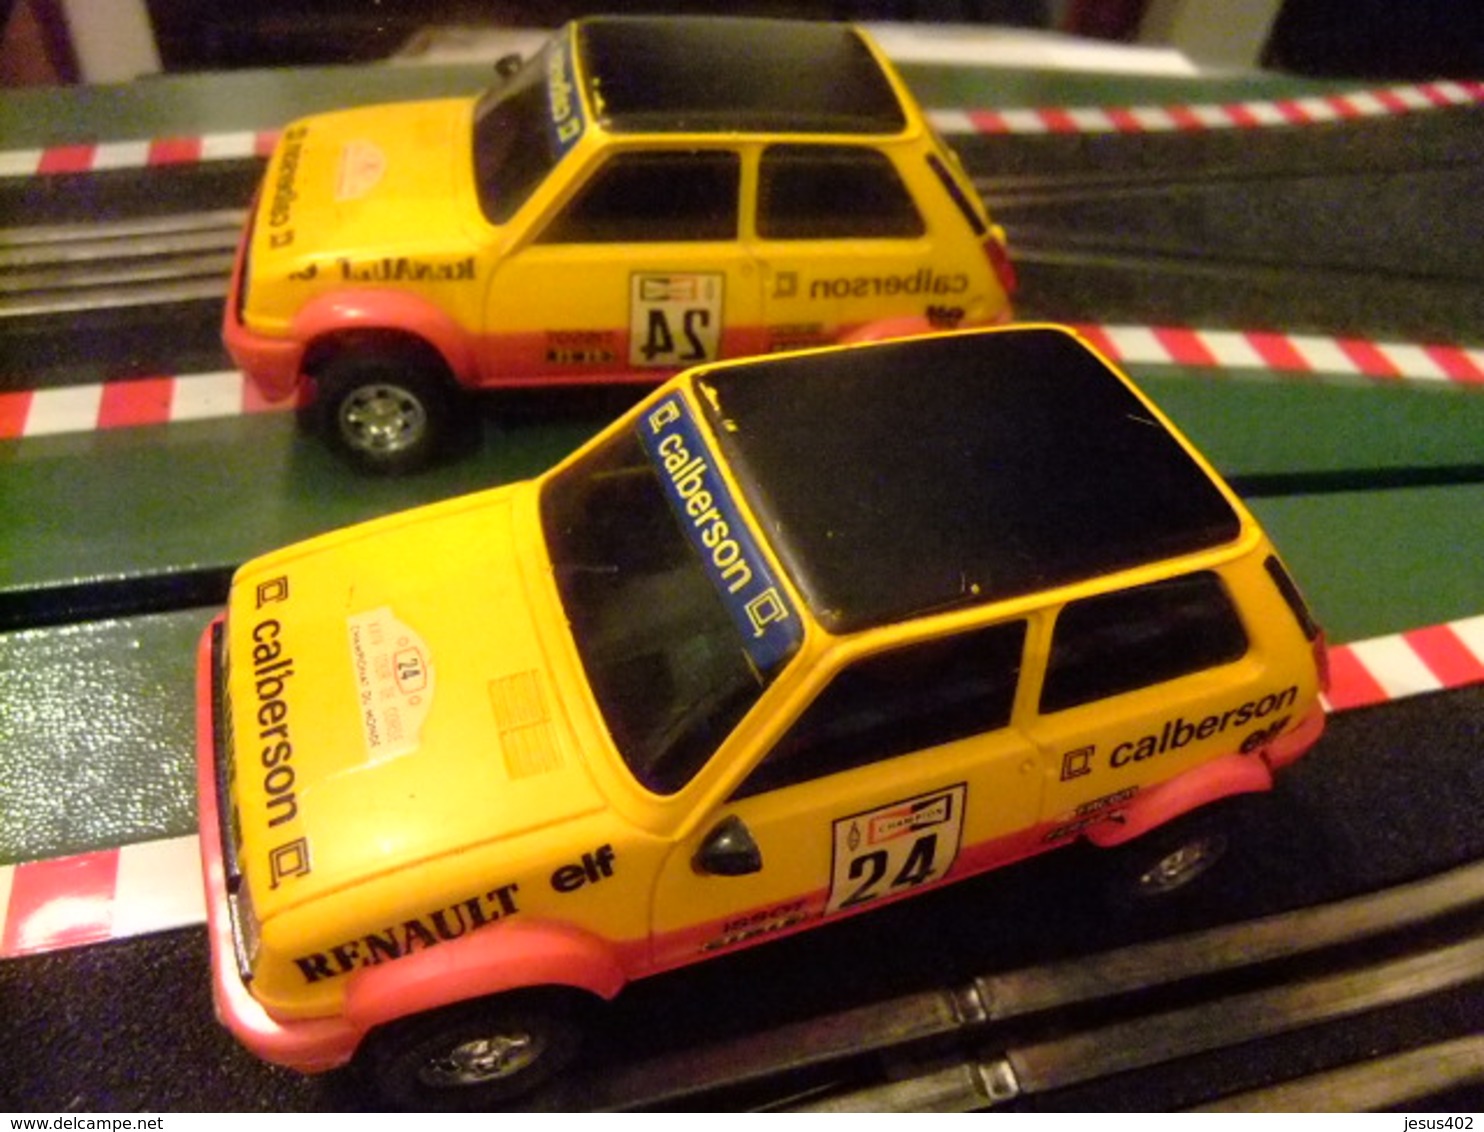 SCALEXTRIC Exin RENAULT R 5 CALBERSON N 24 Ref.4058 Made In Spain - Circuitos Automóviles